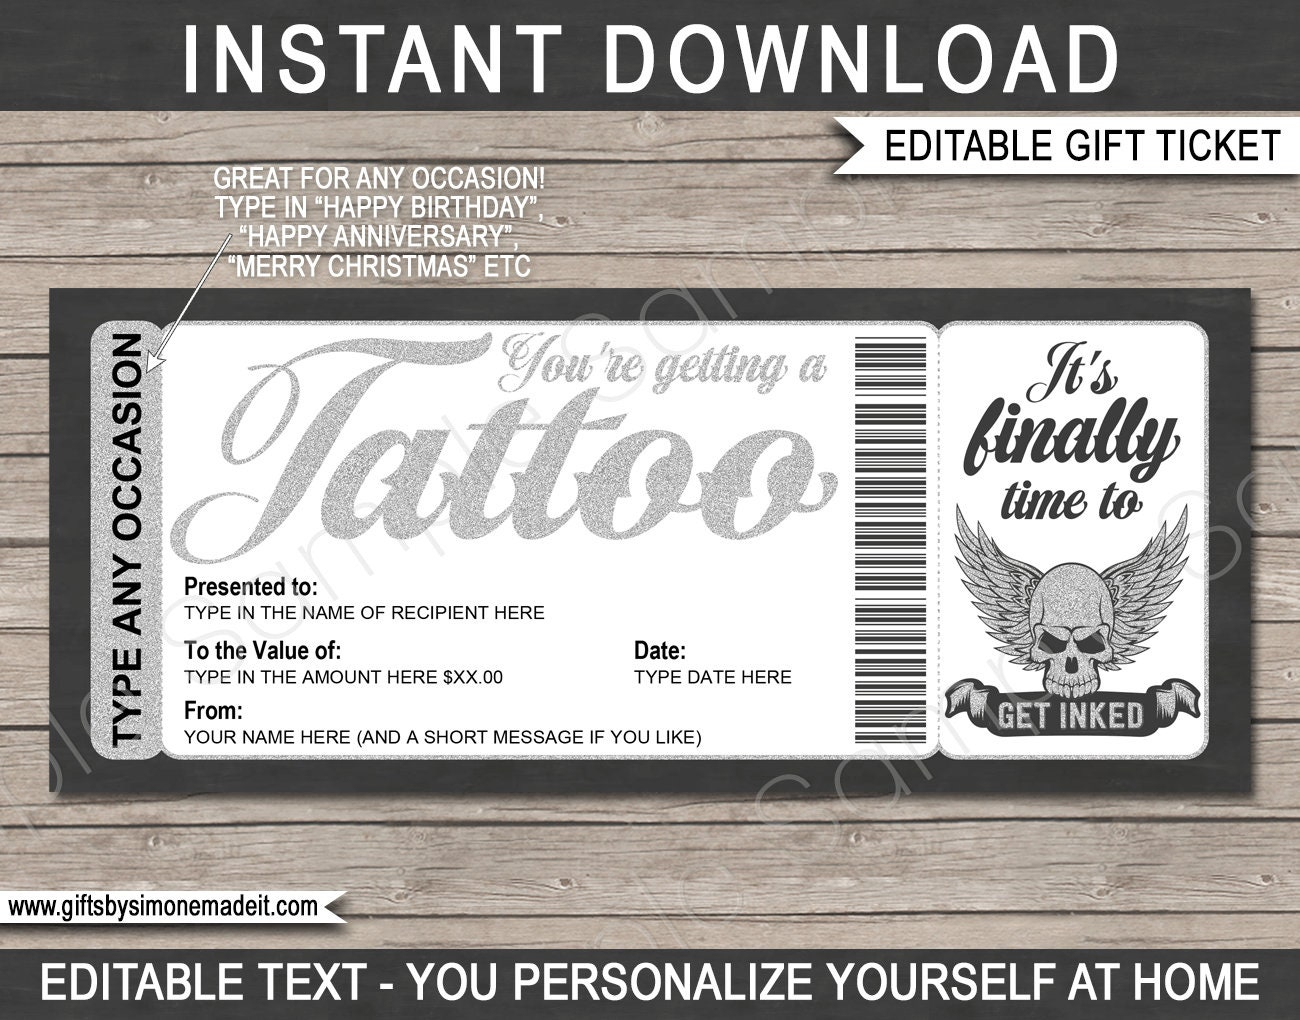 Tattoo Gift Certificate Card Voucher Printable Custom Template – Human  Skull With Wings Design – Get Inked – INSTANT DOWNLOAD Text EDITABLE Throughout Tattoo Gift Certificate Template